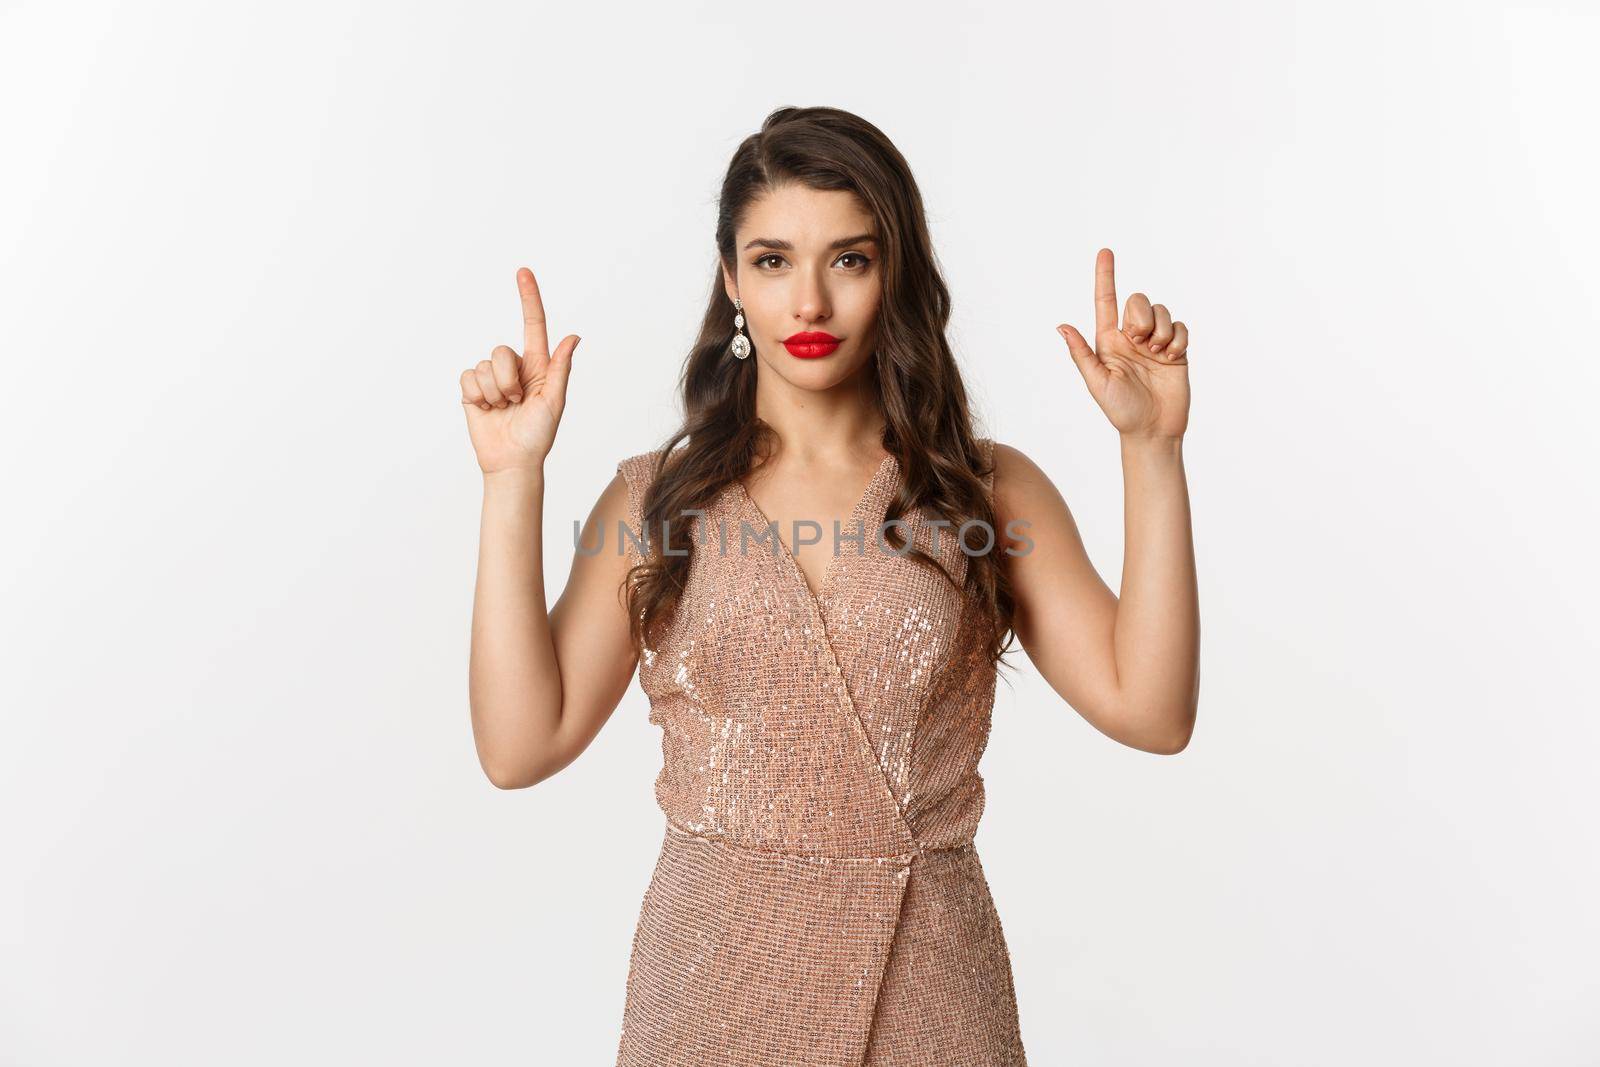 New Year, christmas and celebration concept. Elegant young woman with red lipstick, wearing party dress and looking sassy, pointing fingers up at logo, white background.